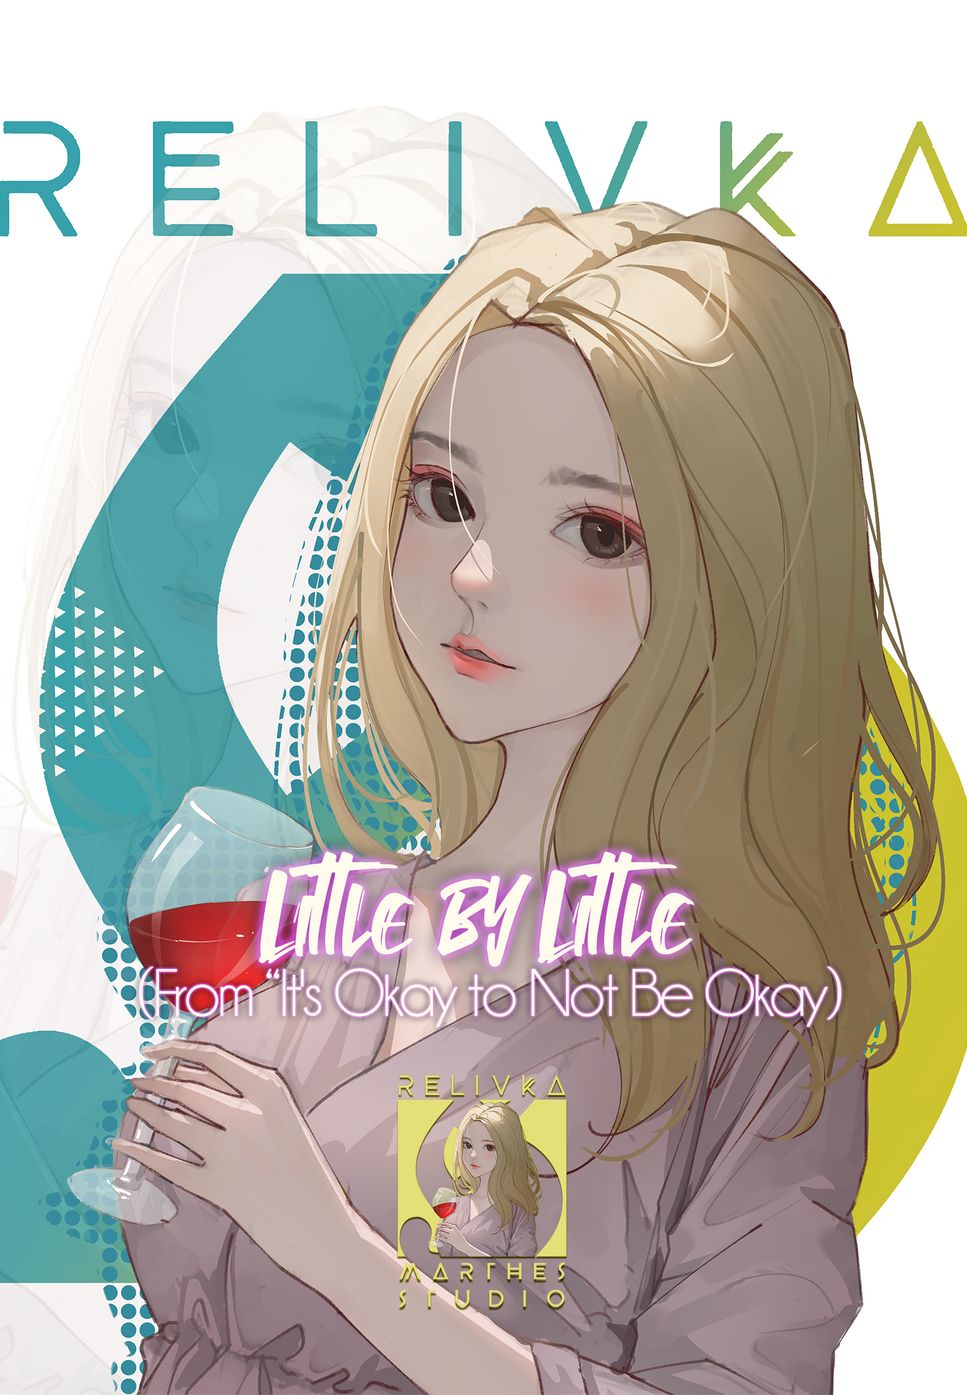 : Cheeze - Little by Little (It's Okay to Not Be Okay OST) by Relivka (Marthes Studio)